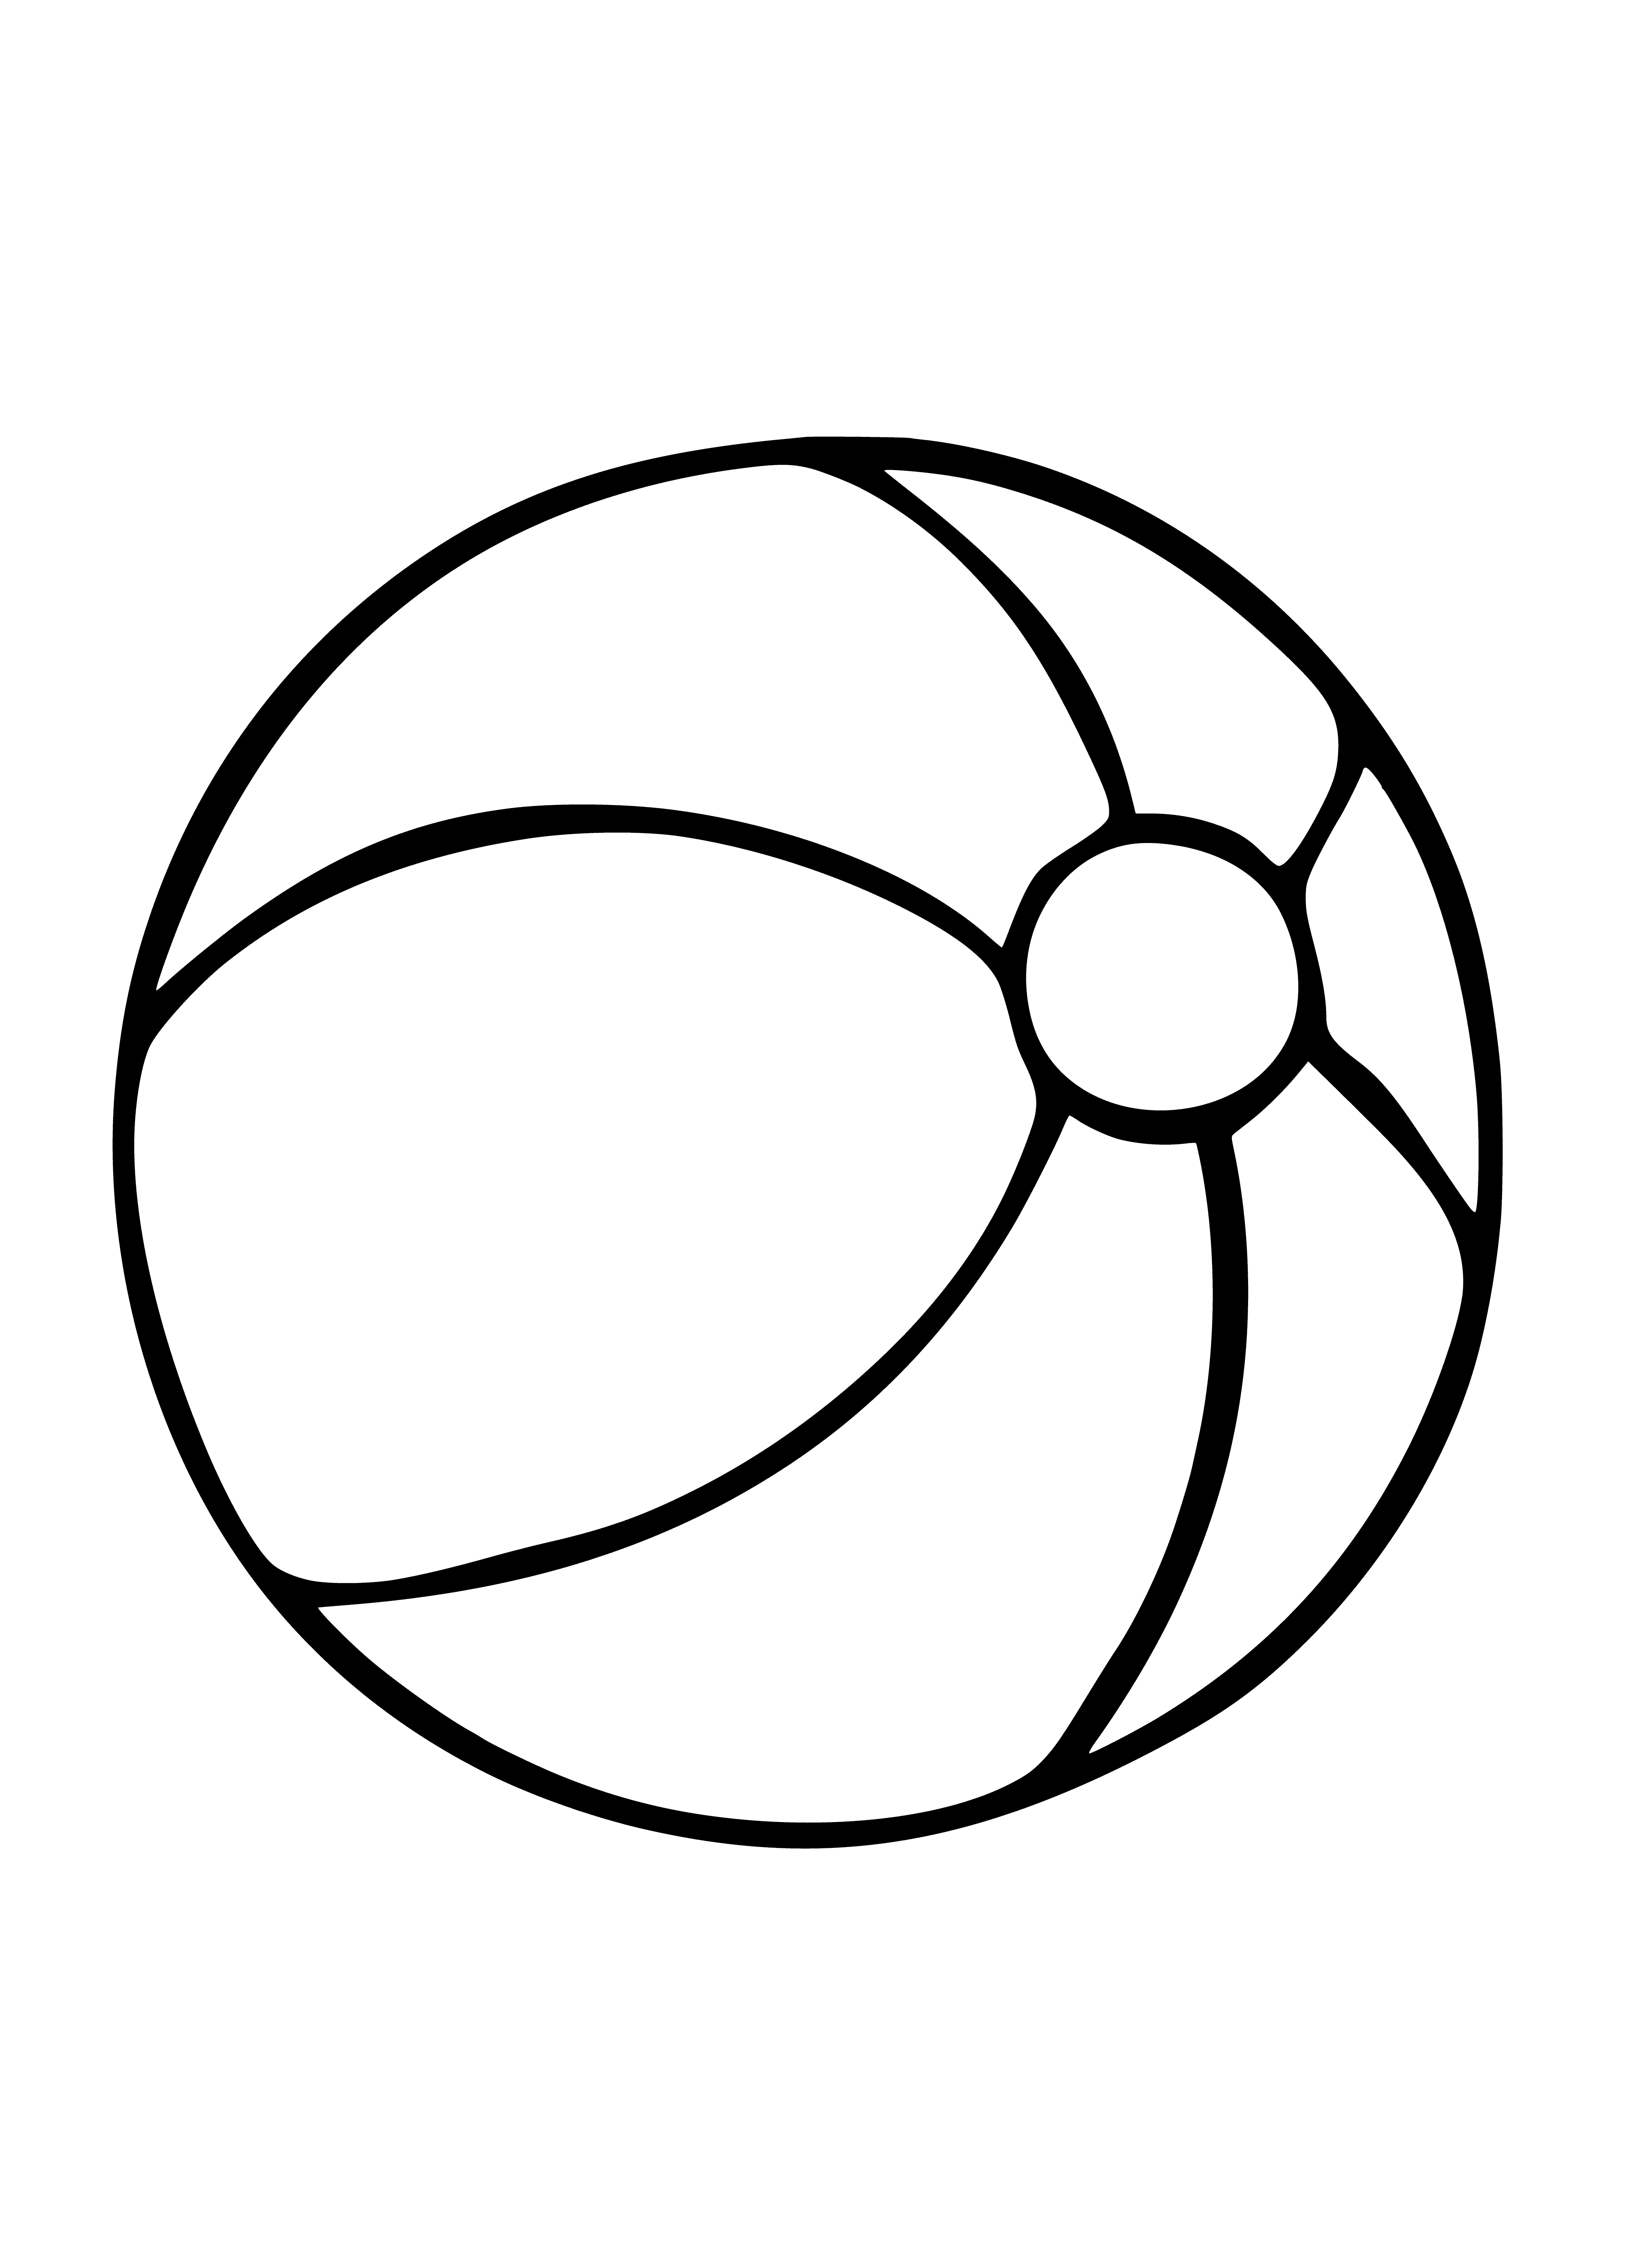 Ball coloring page